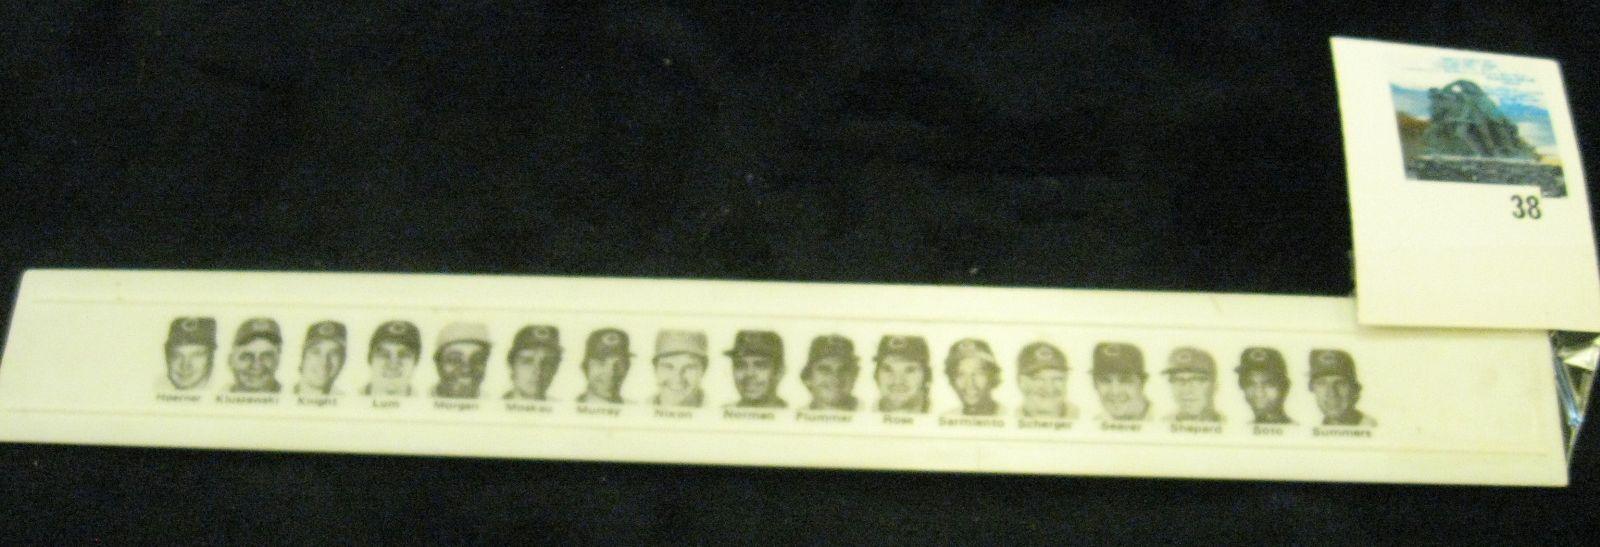 1977 Cincinnati Reds plastic ruler, all images and graphics visible